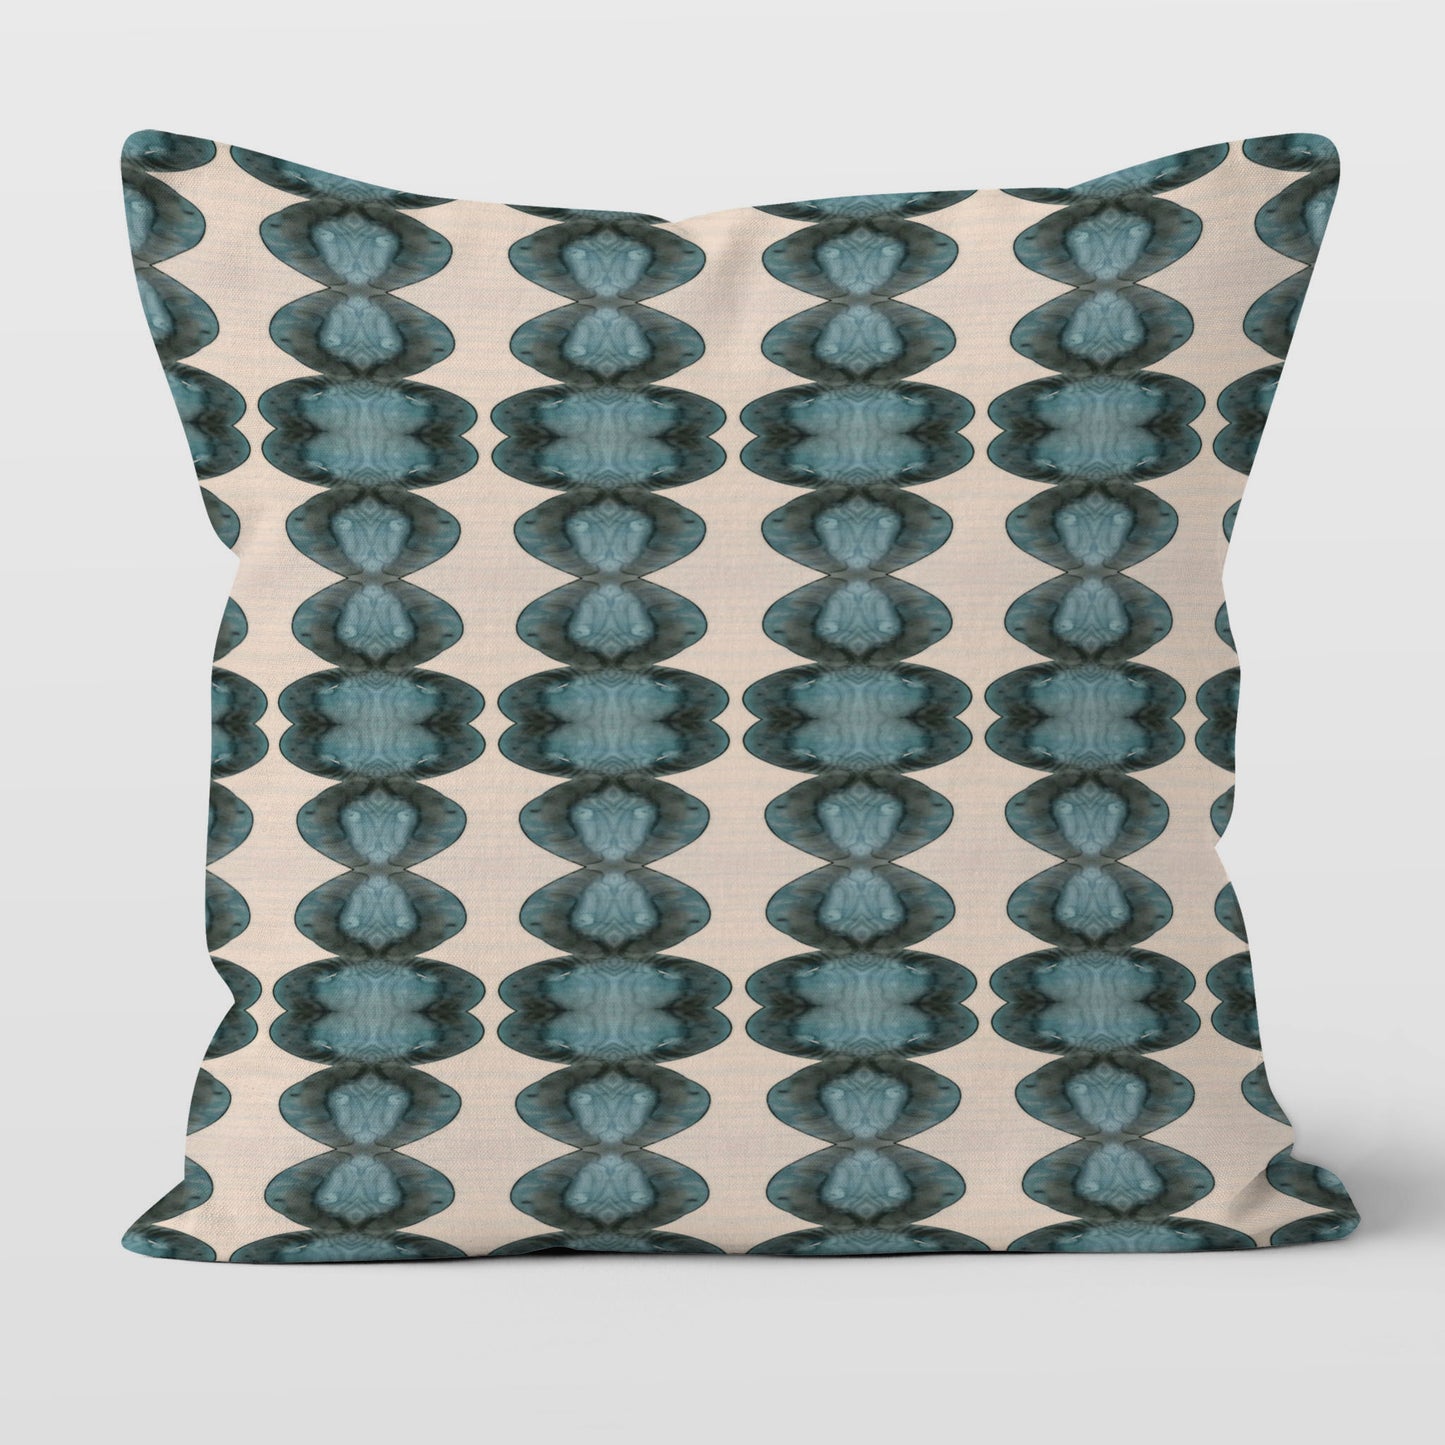 Throw pillow featuring abstract handprinted pattern in blue, black, and cream.